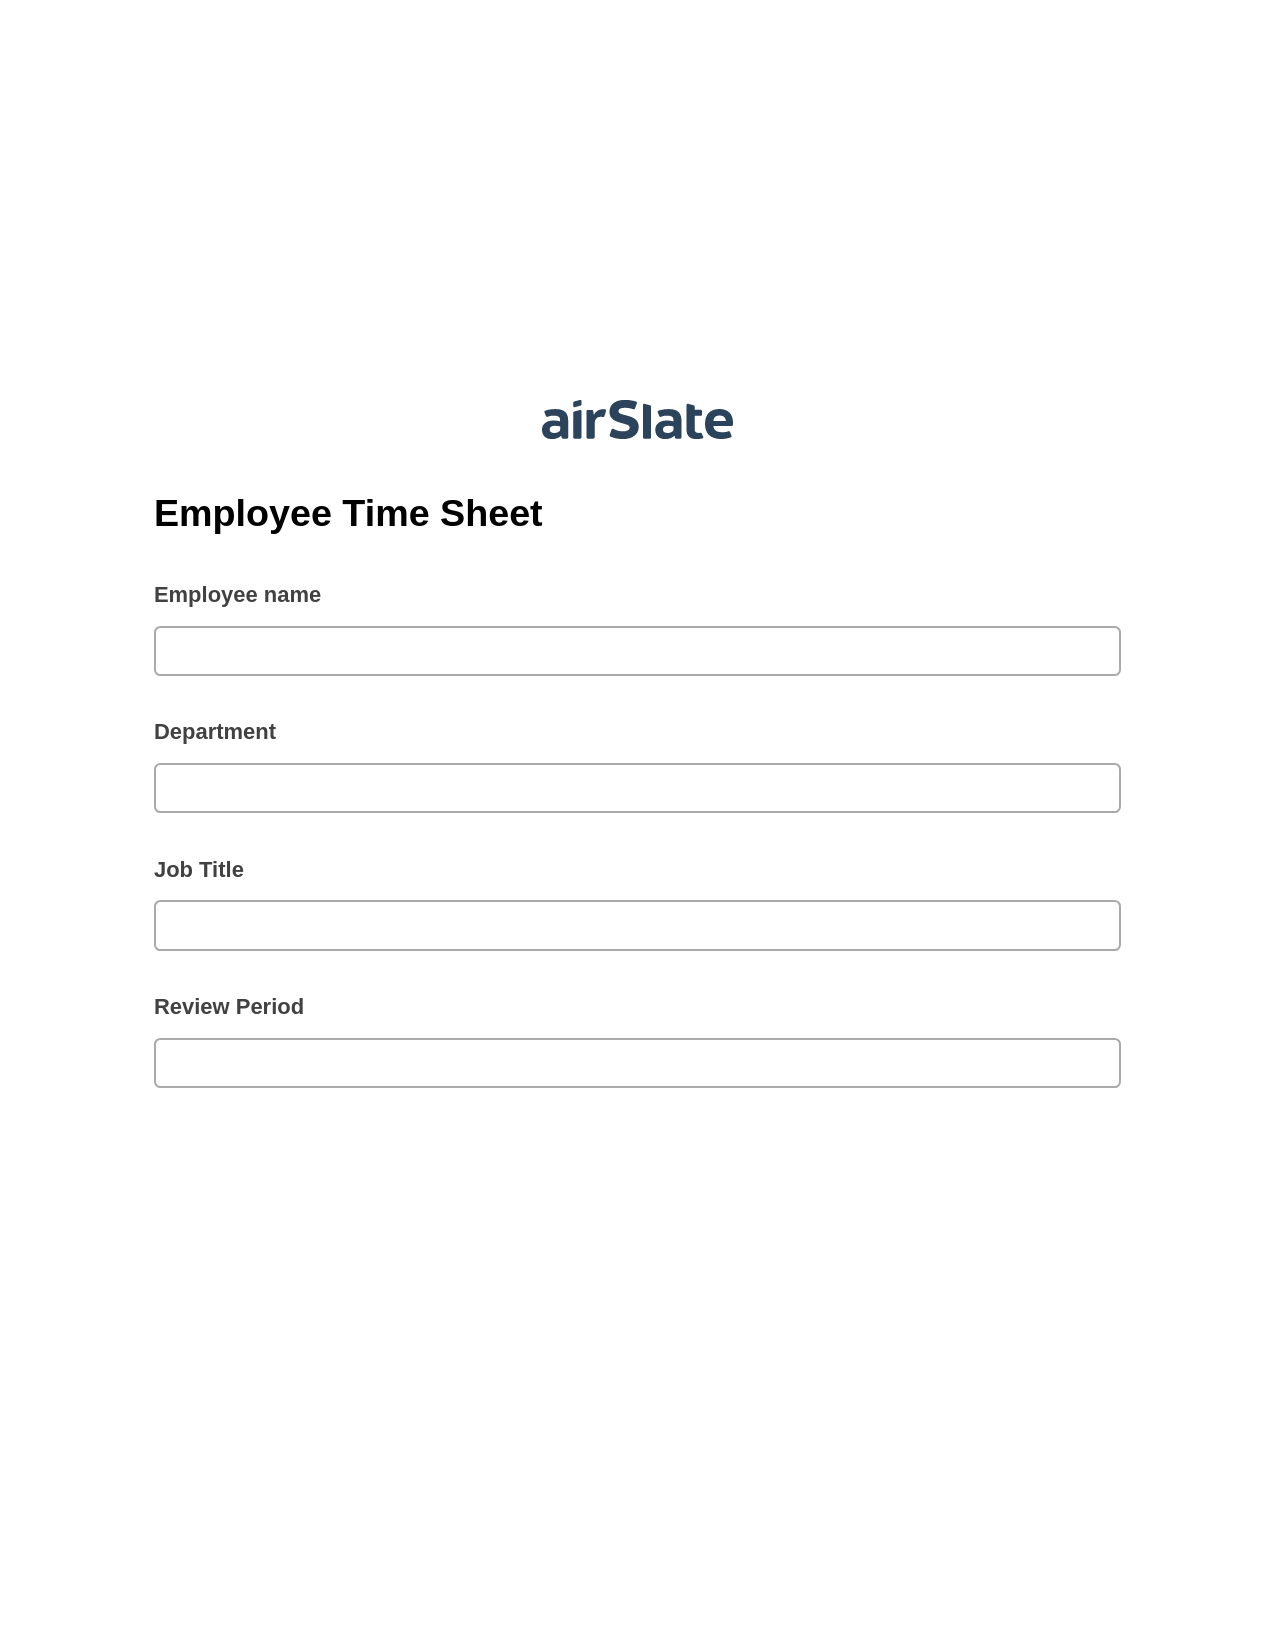 Multirole Employee Time Sheet Pre-fill from Salesforce Records with SOQL Bot, Create Salesforce Records Bot, Archive to SharePoint Folder Bot